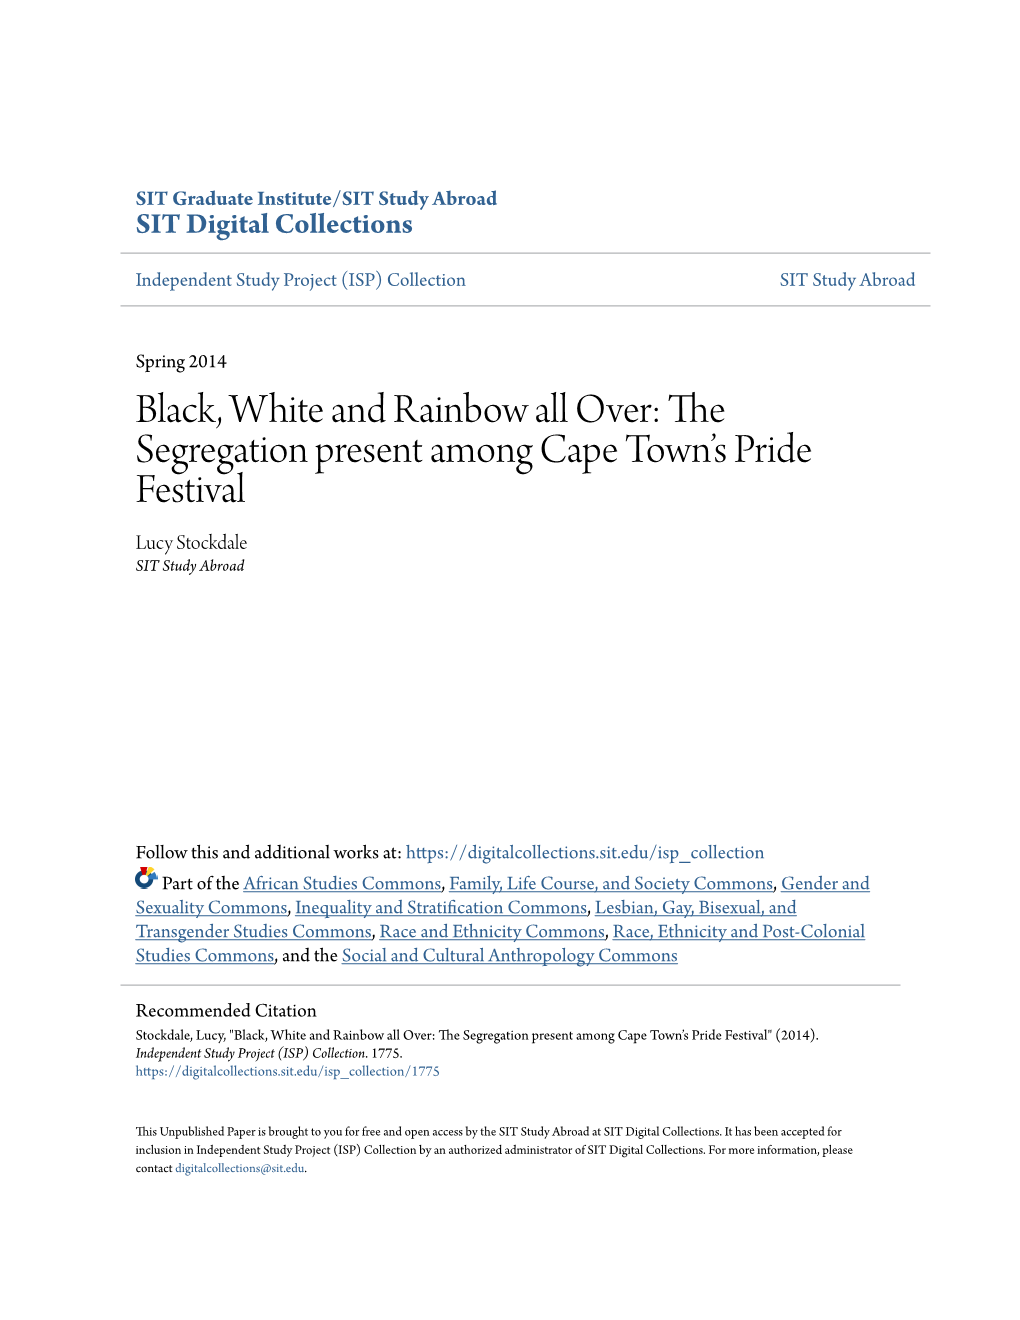 Black, White and Rainbow All Over: the Segregation Present Among Cape Town’S Pride Festival Lucy Stockdale SIT Study Abroad